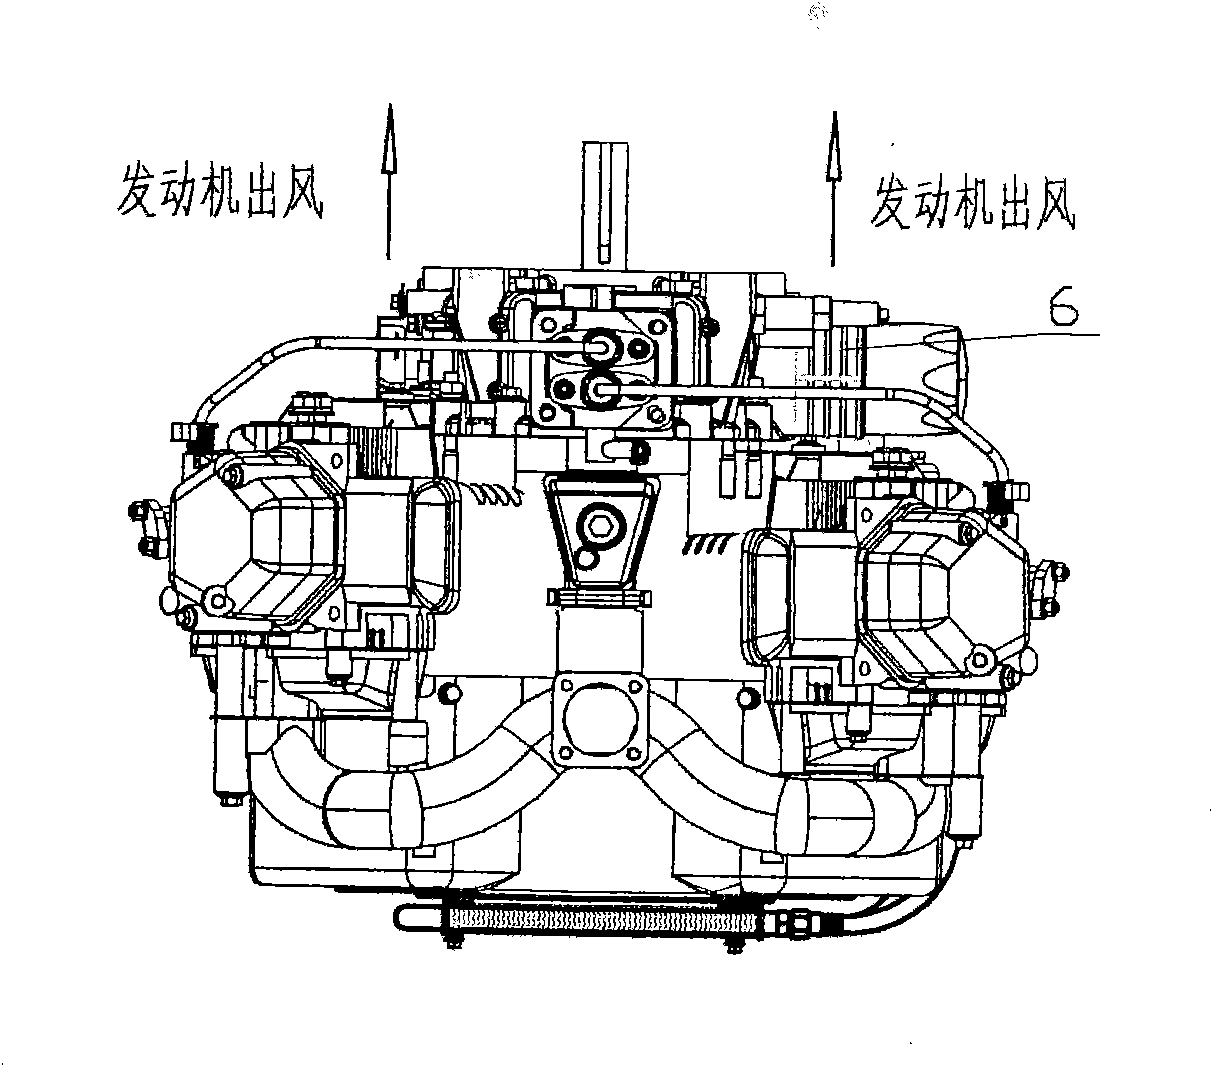 Novel engine oil cooling system externally equipped with condenser at air inlet of air-cooled engine